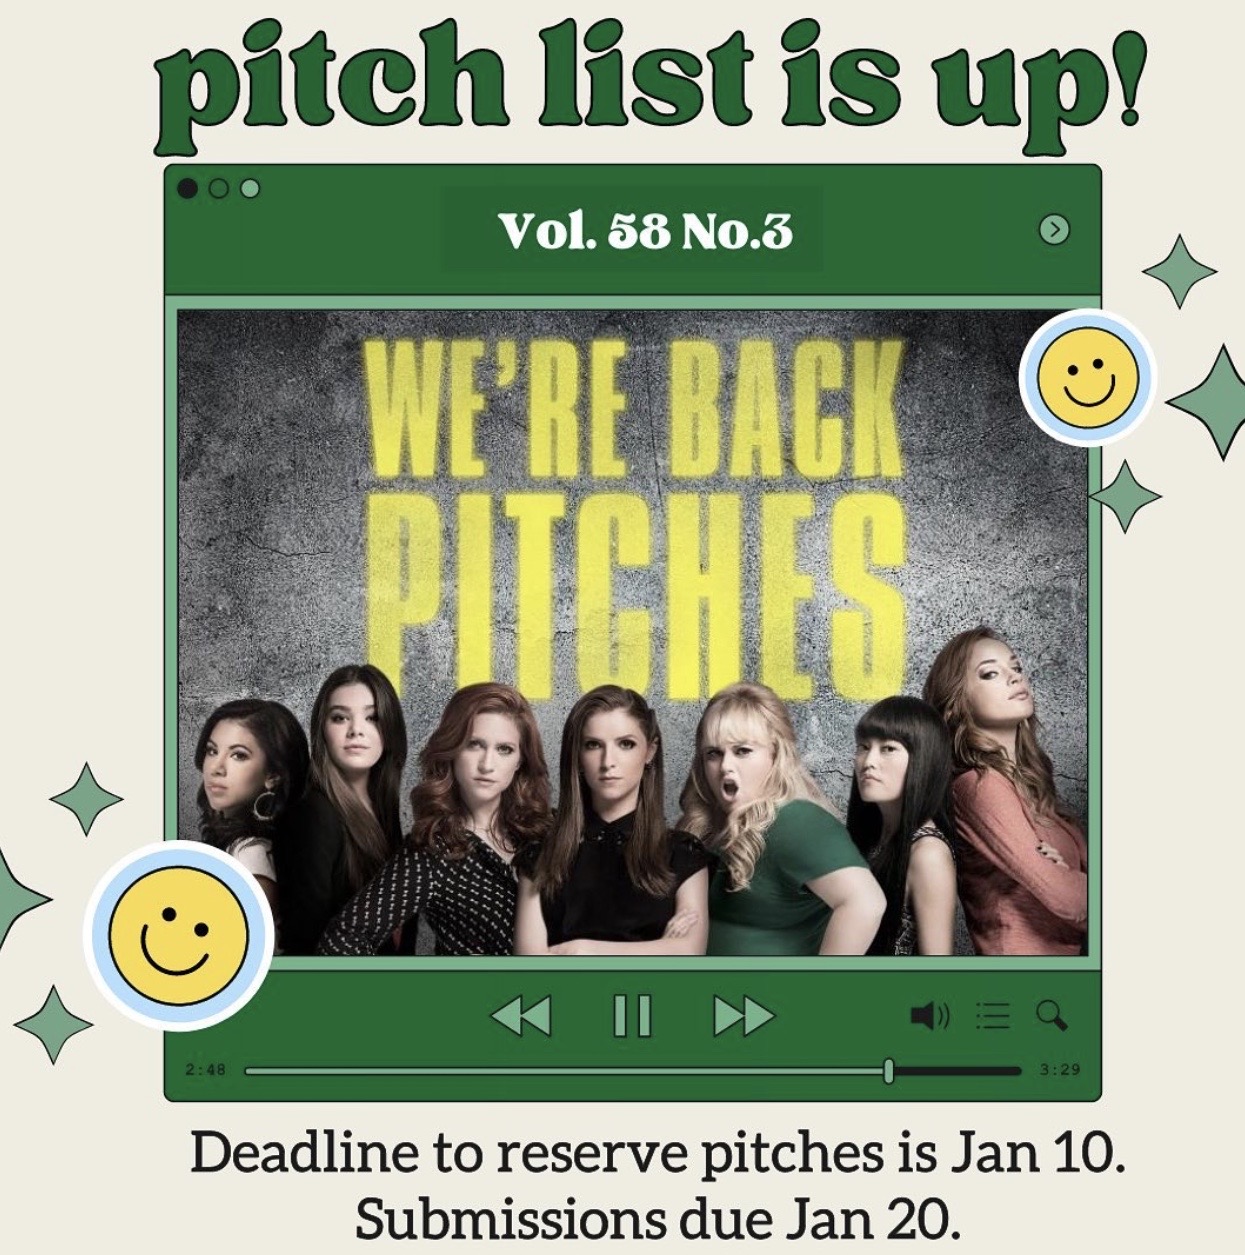 Hey Pitches! VOL58 Issue 3 Pitch list is Out!